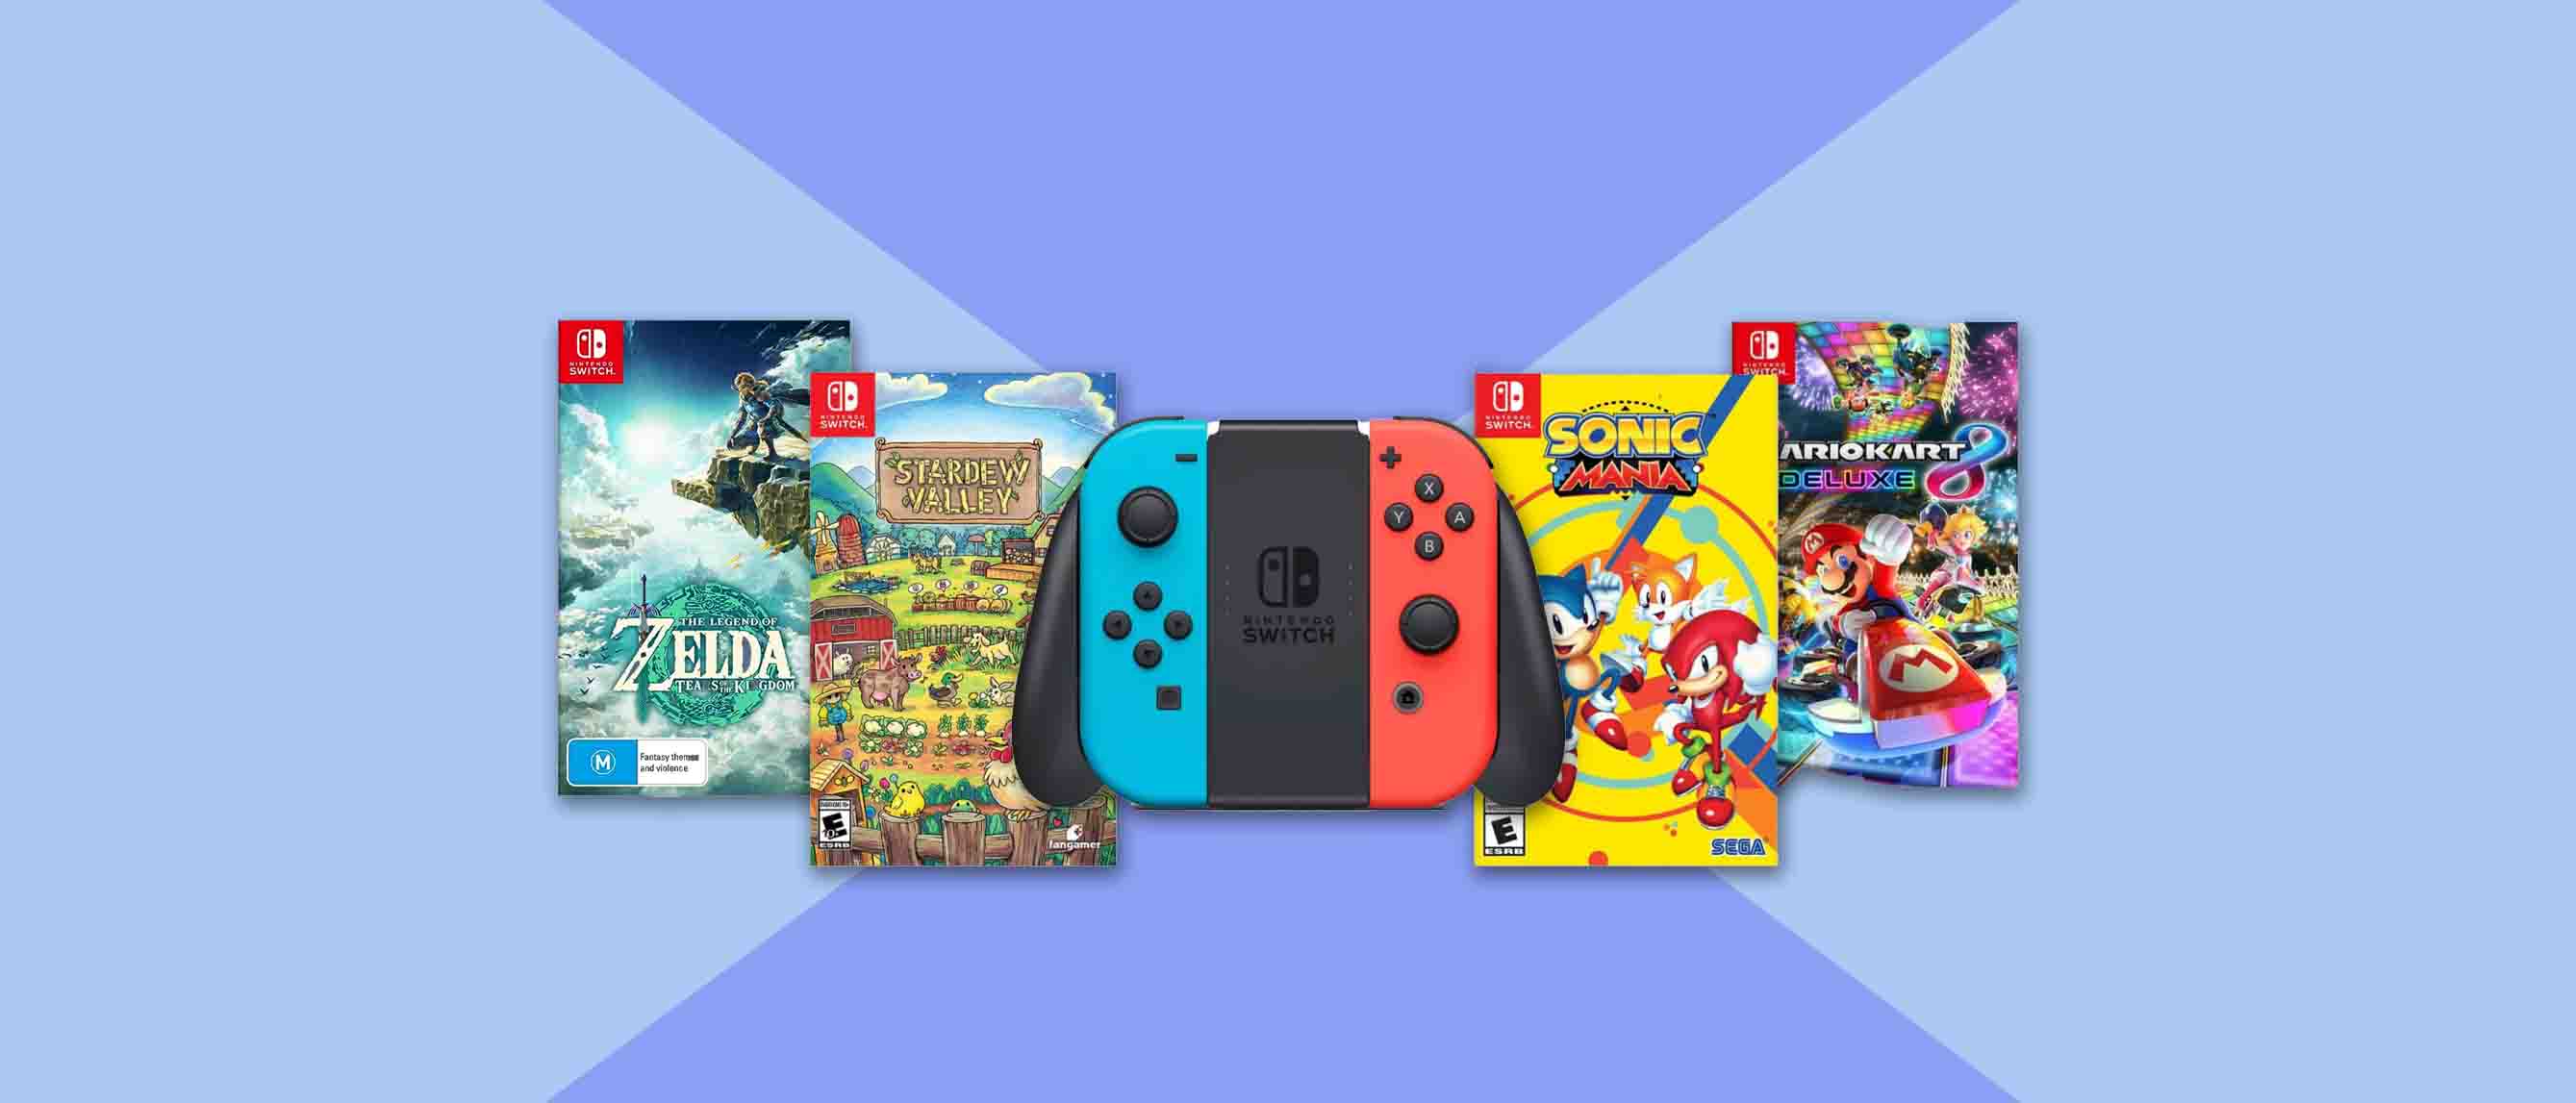 Image of four Nintendo Games and Nintendo Switch